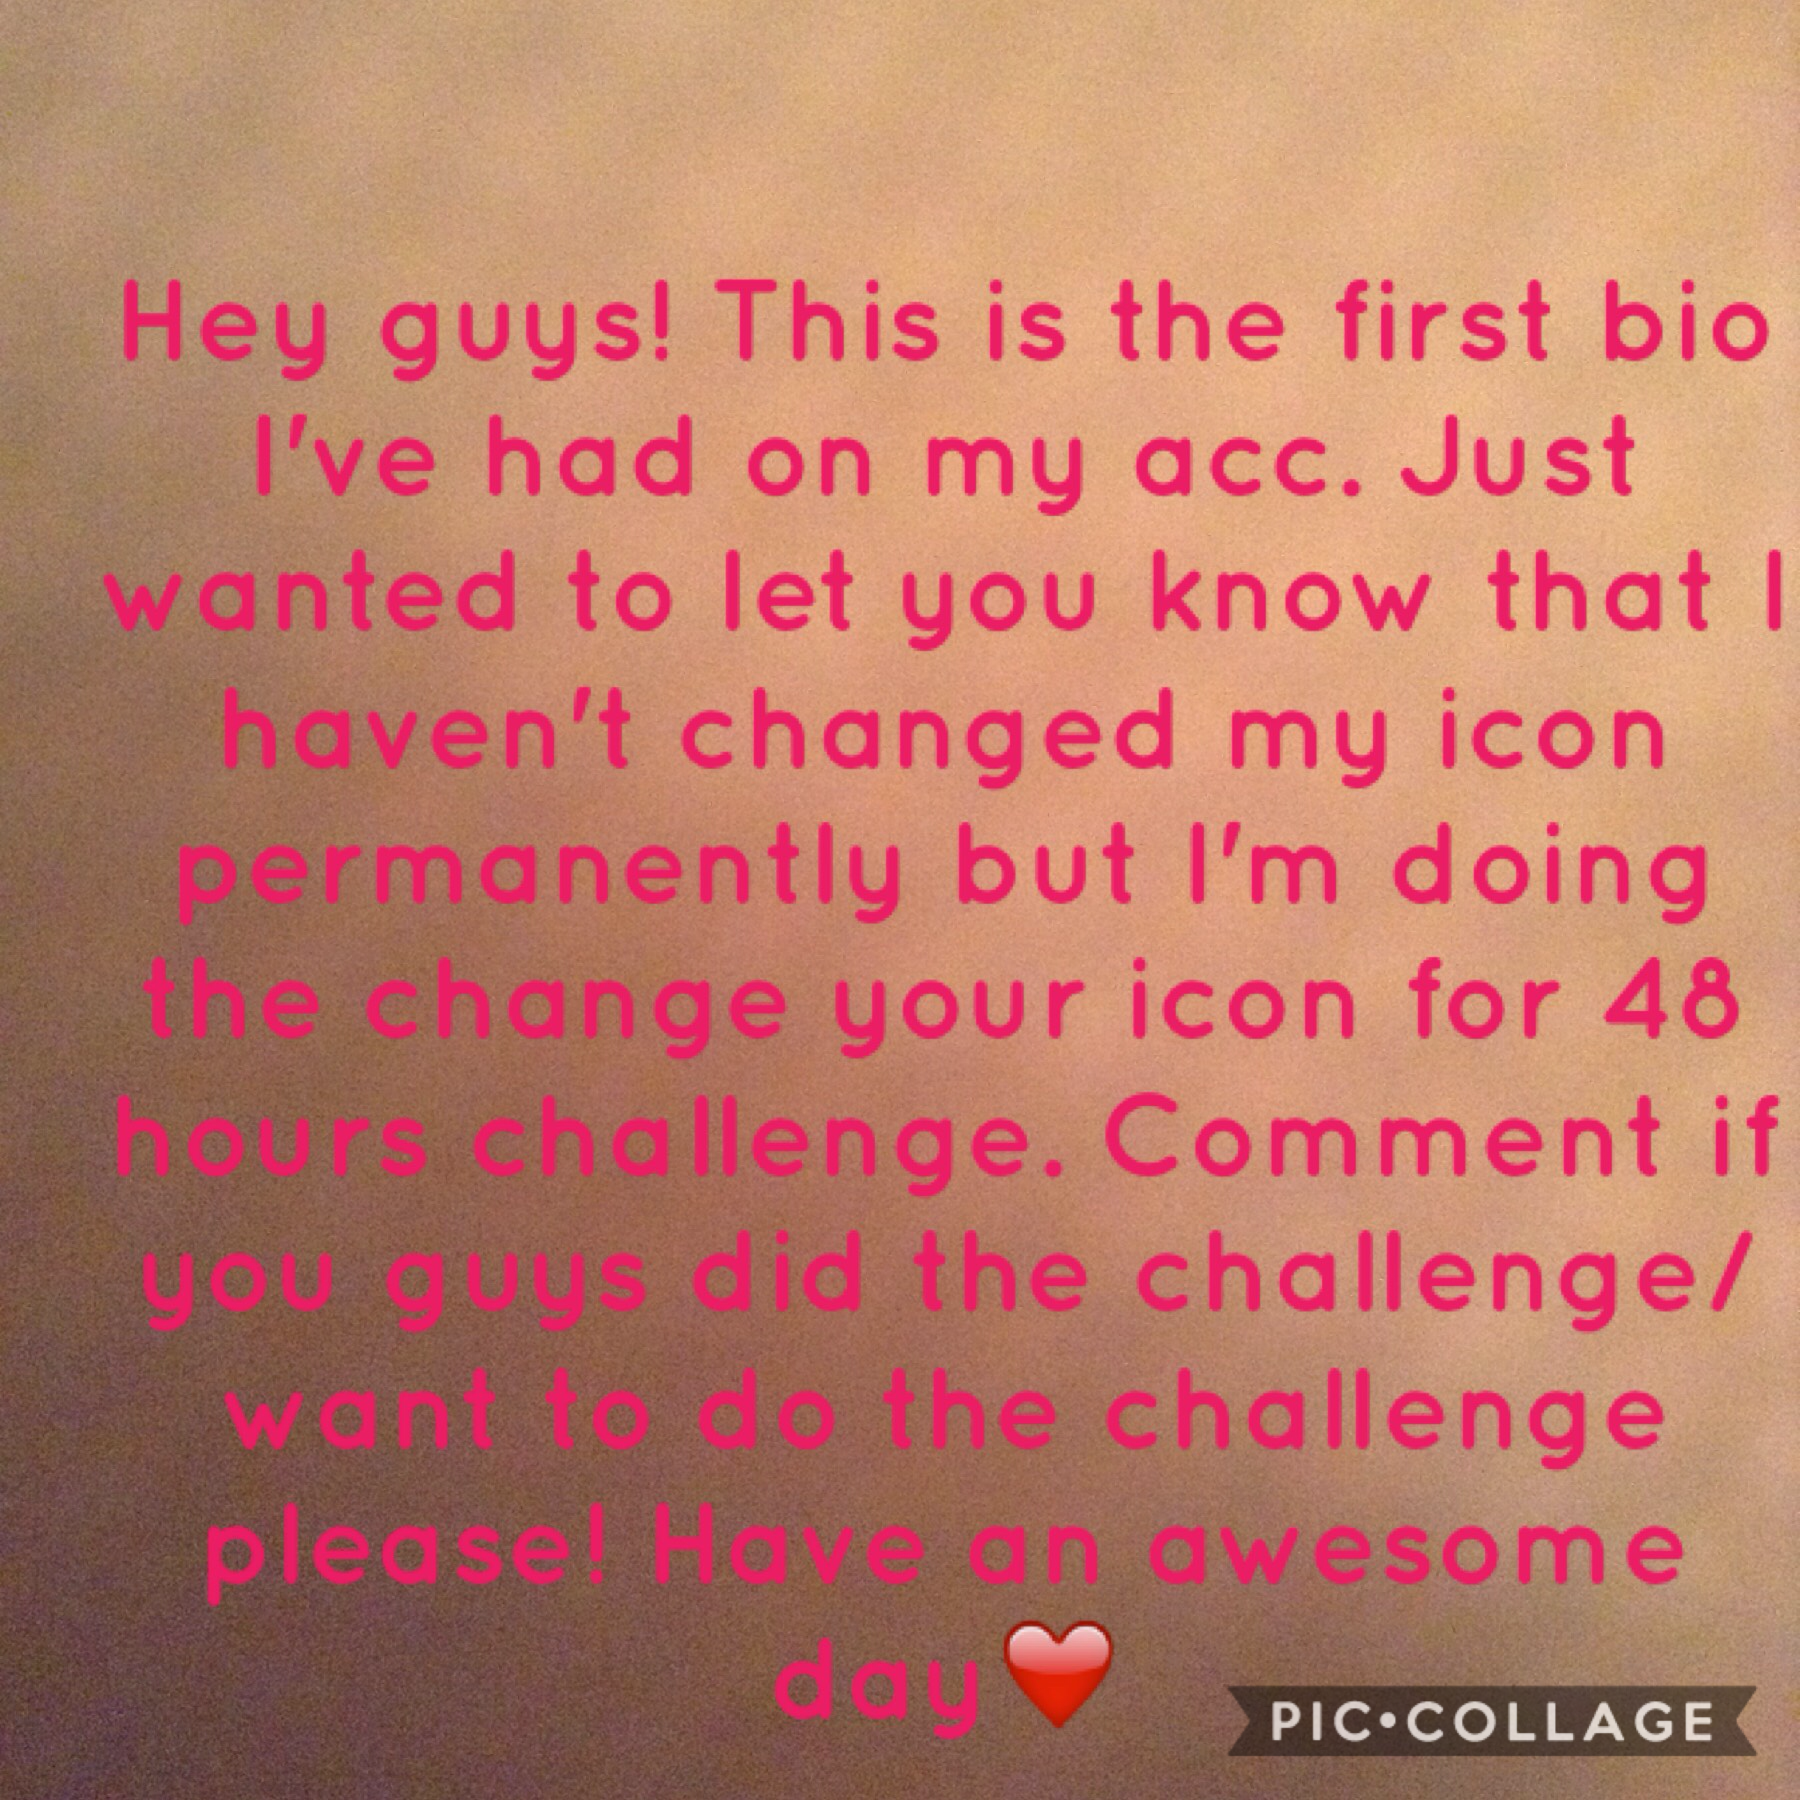 Do the challenge with me!